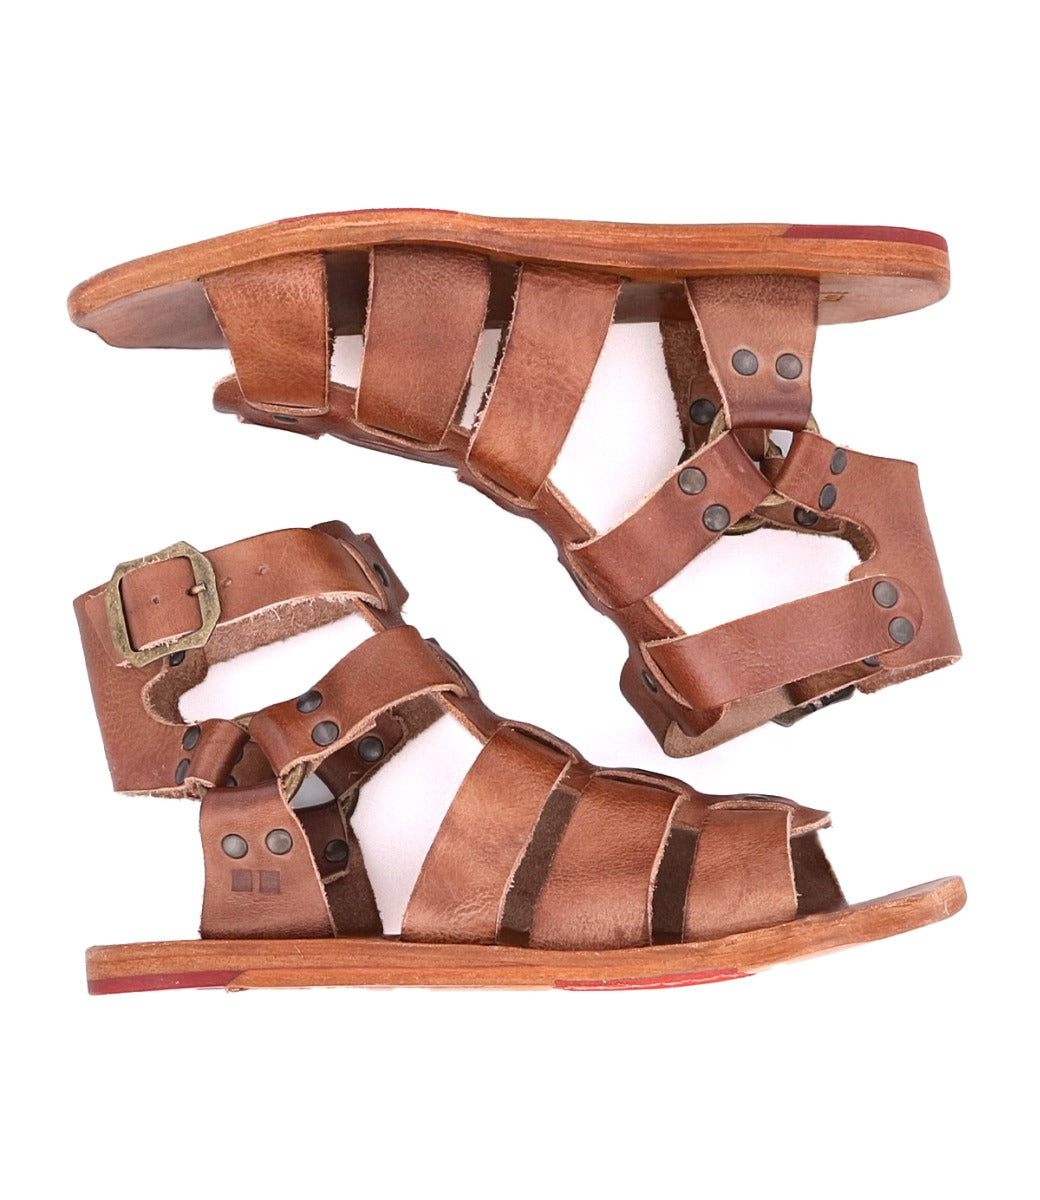 A pair of Hera sandals with straps and buckles by Bed Stu.